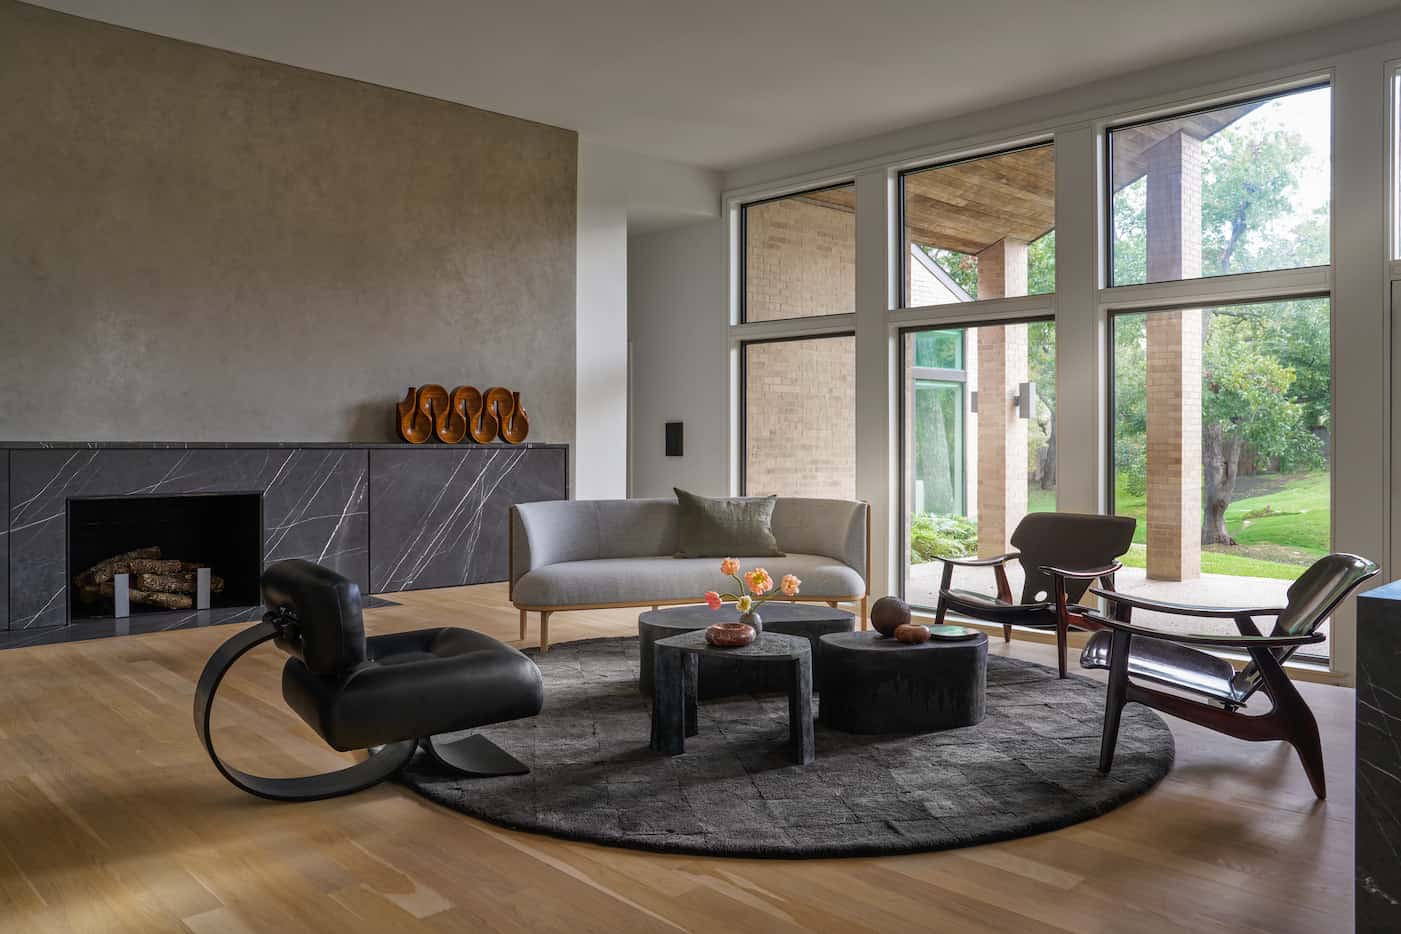 In this modern living room designed by Joshua Rice, find a vintage Brazilian “Alta” lounge...